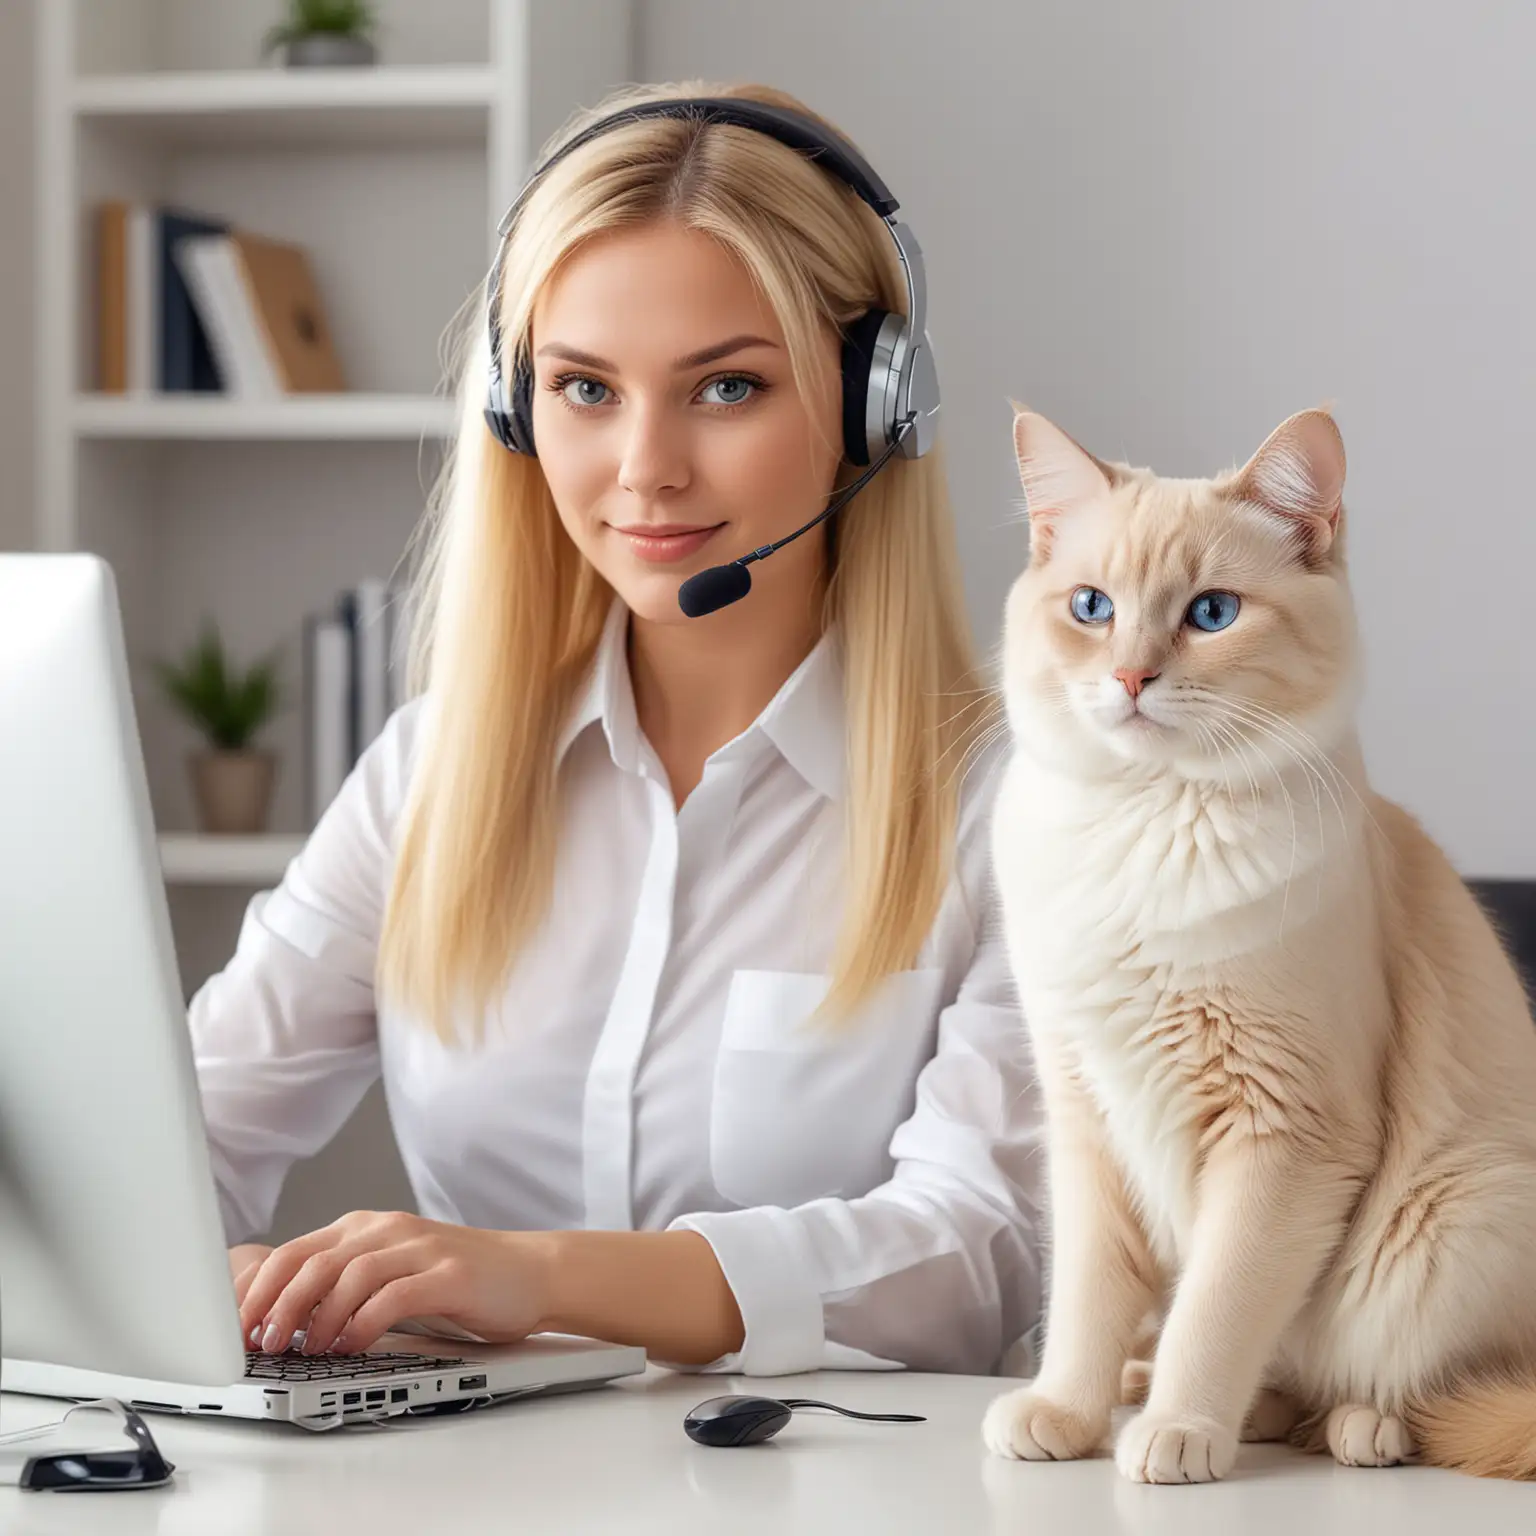 Remote Contact Center Agent Working with Ragdoll Cat in Futuristic Setting